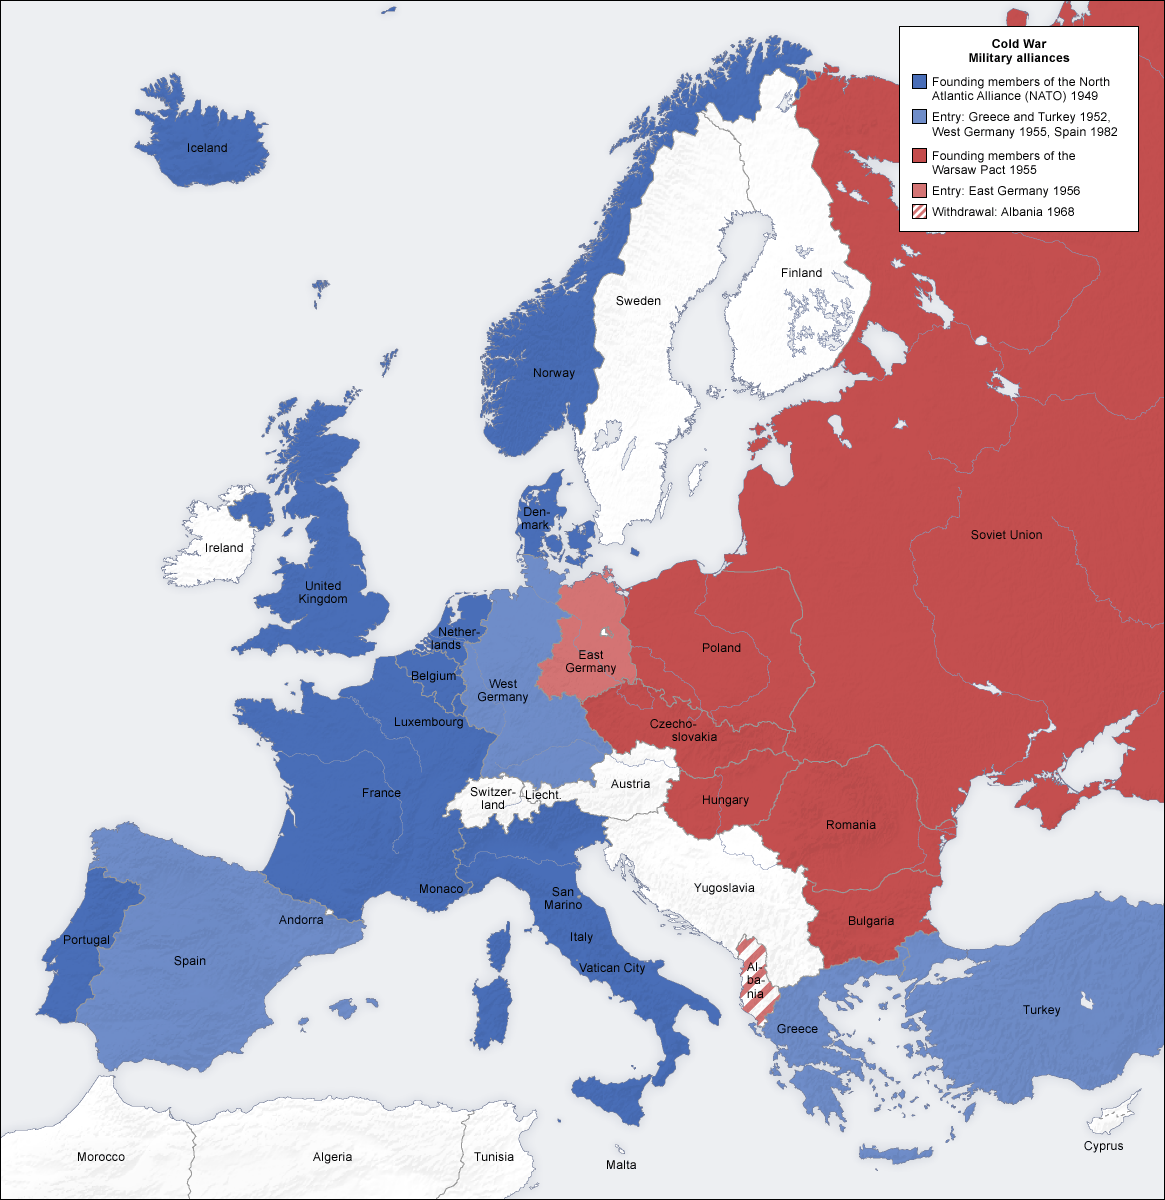 Cold War Military alliance in Europe 2006